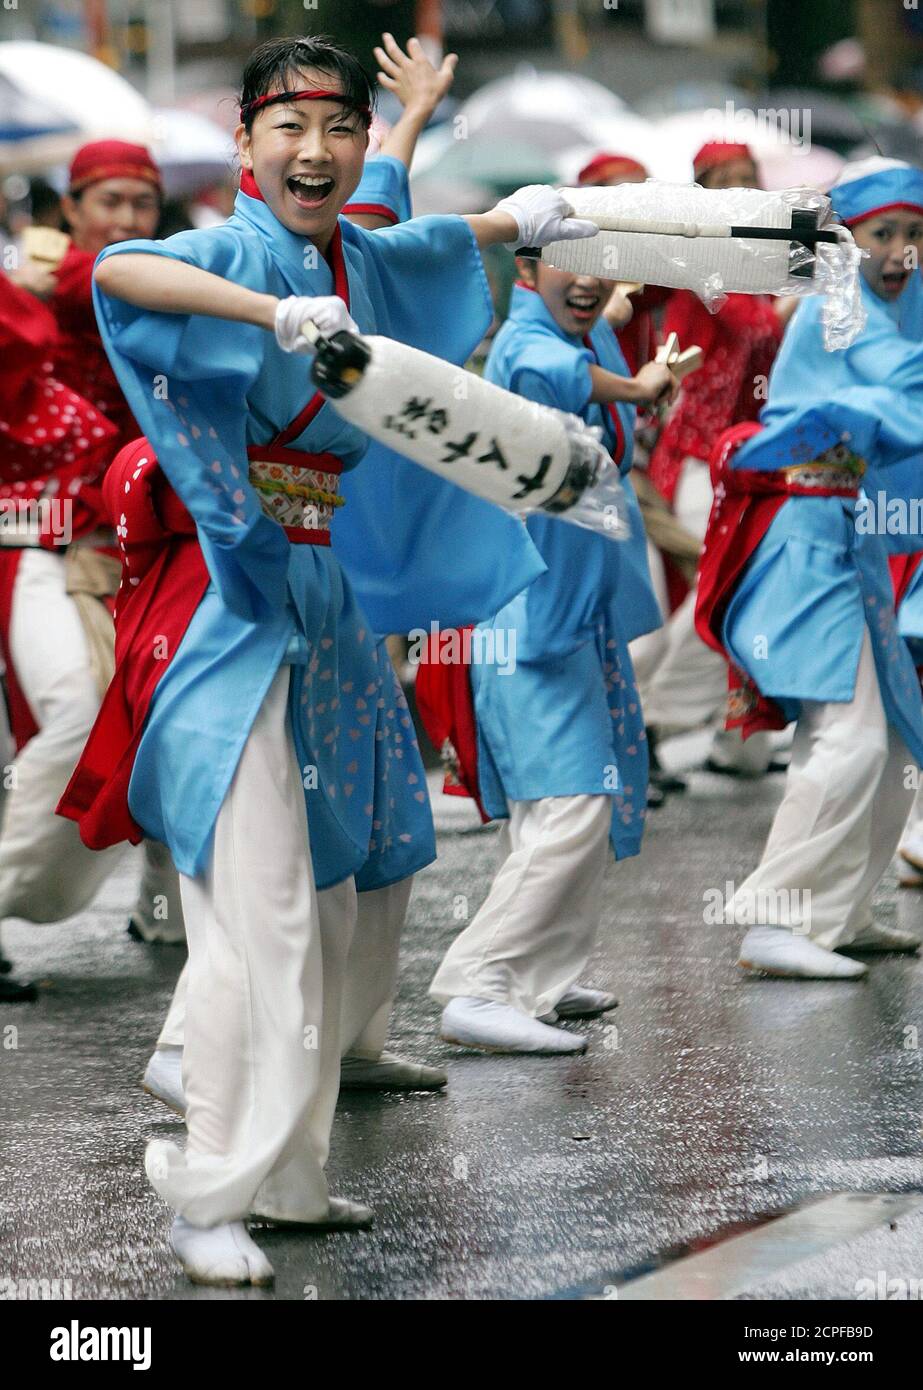 A Japanese woman dances during Yosakoi festival in Tokyo August 29, 2004. About 6,000 dancers in colourful costumes from all over Japan took part in the festival, according to the organisers. REUTERS/Yuriko Nakao  YN/LA Stock Photo